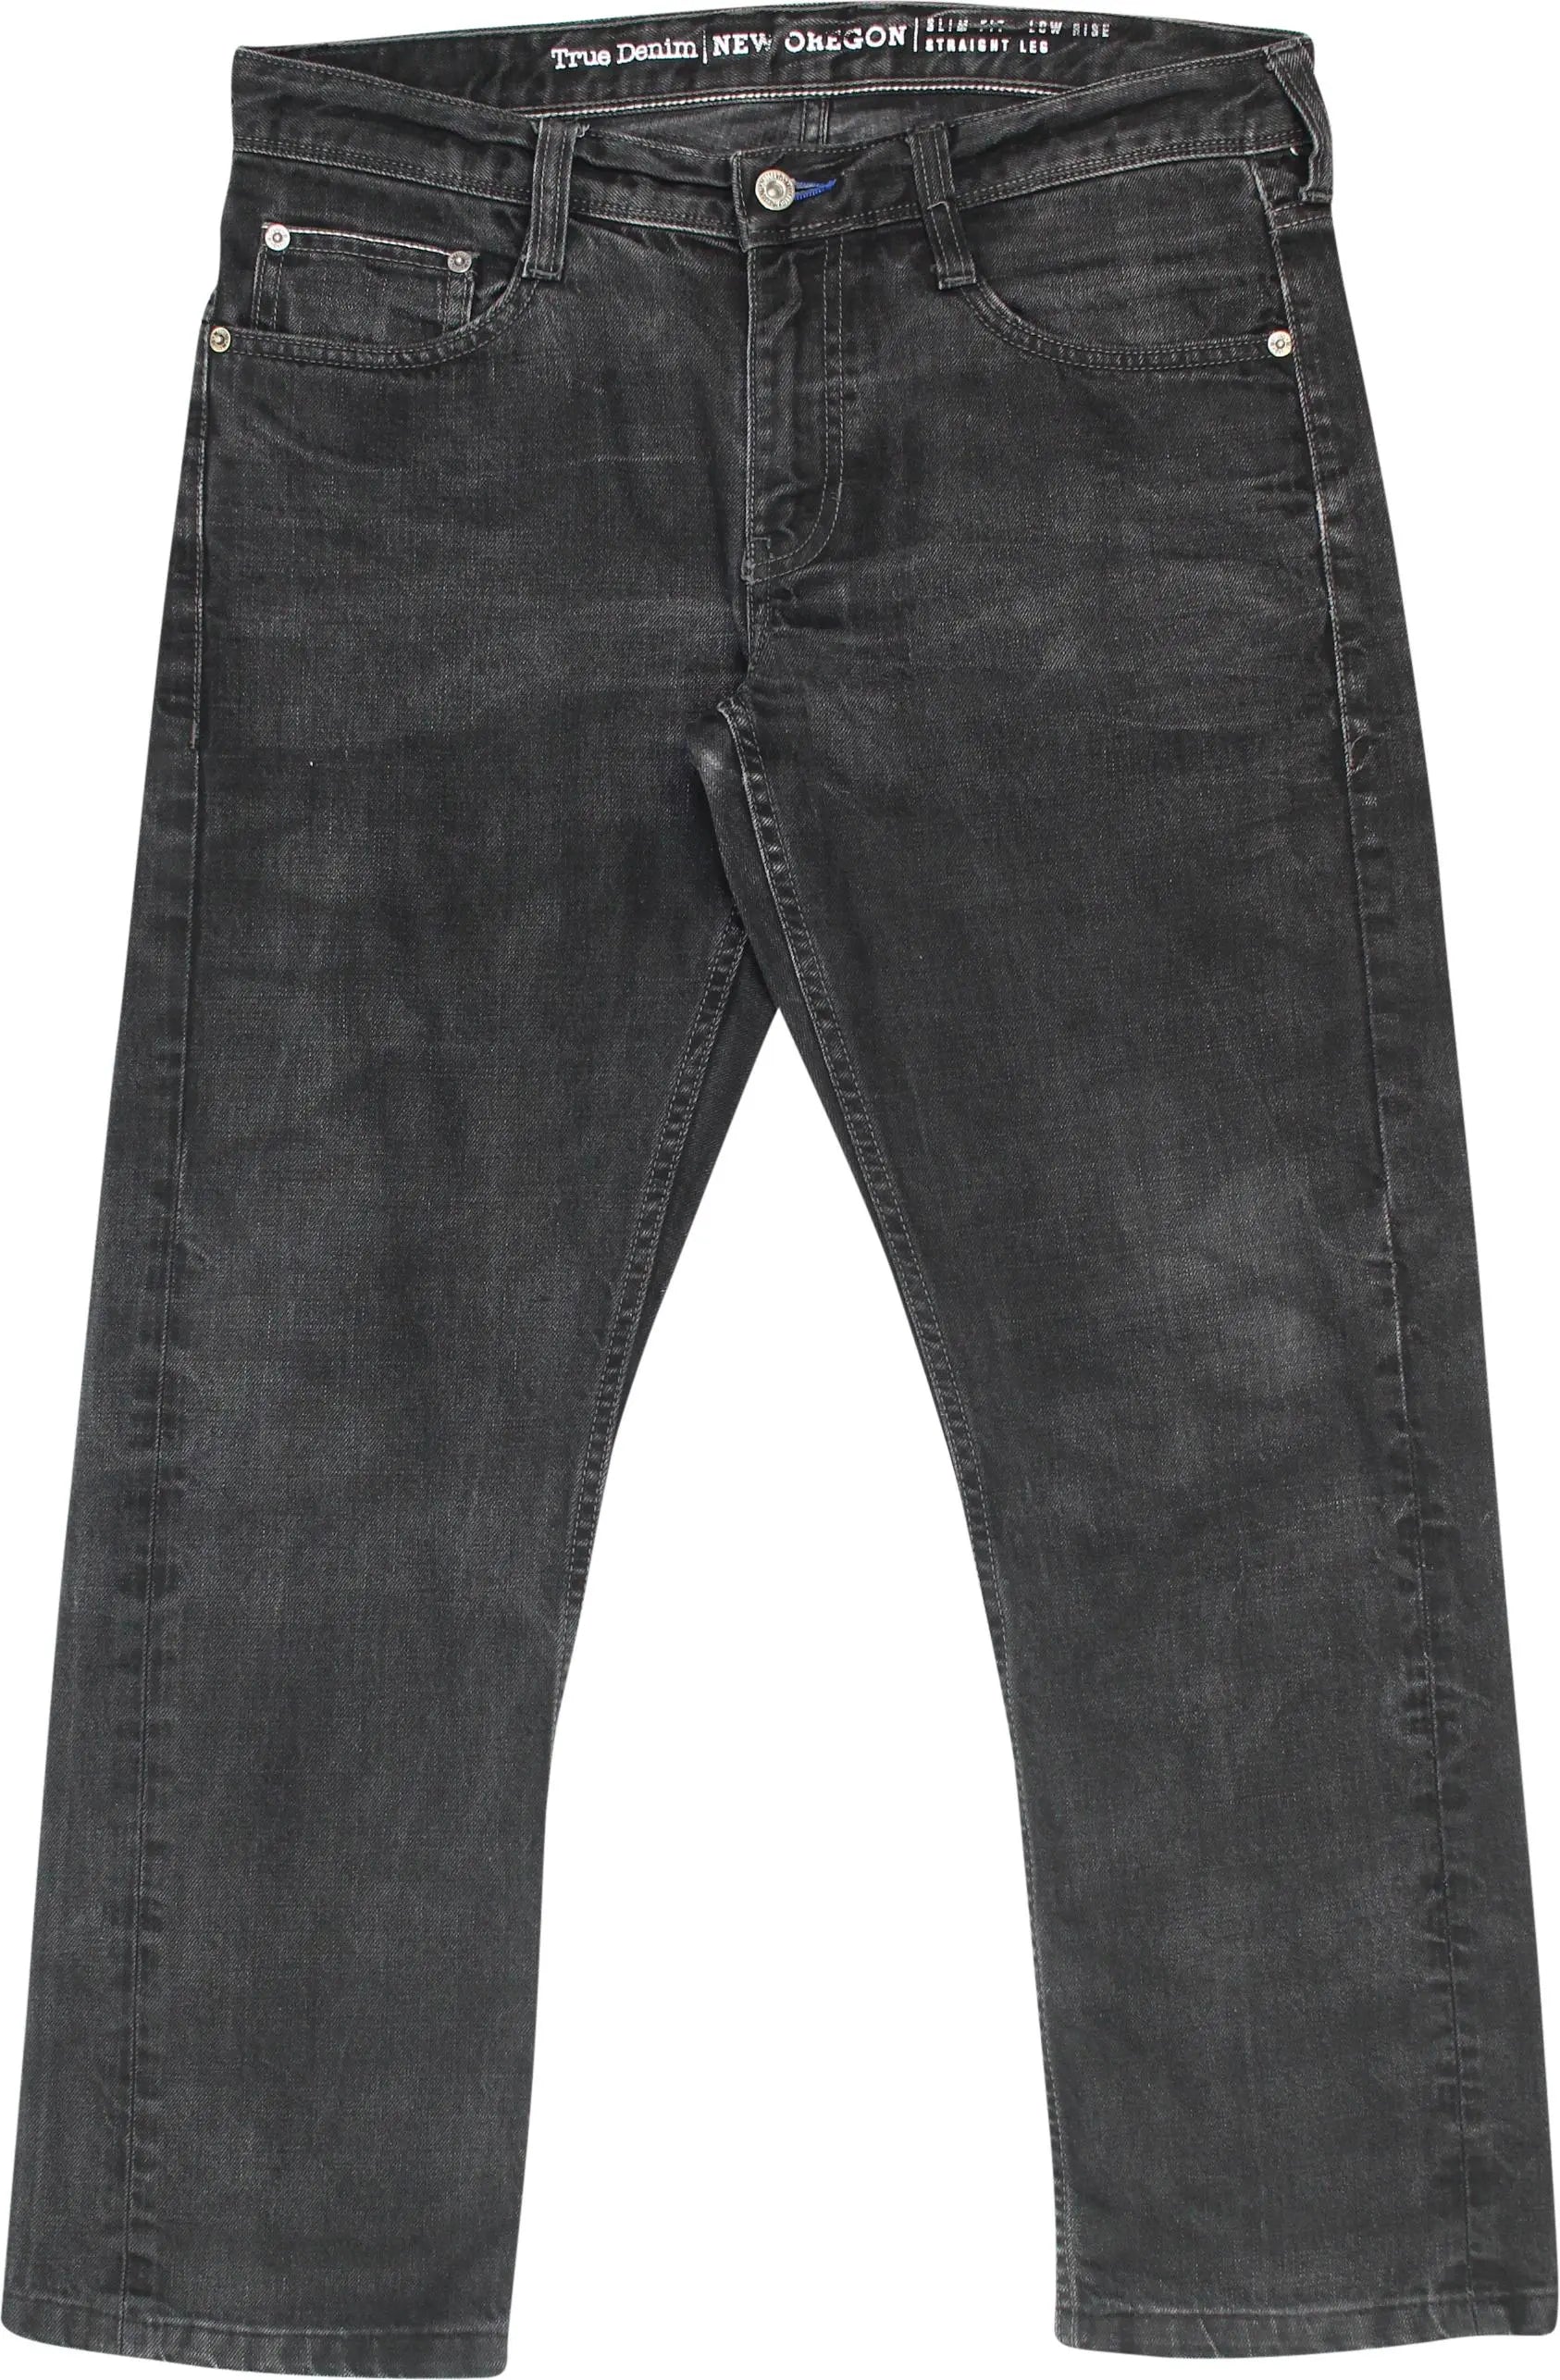 Mustang - Mustang New Oregon Slim Fit Straight Leg Jeans- ThriftTale.com - Vintage and second handclothing